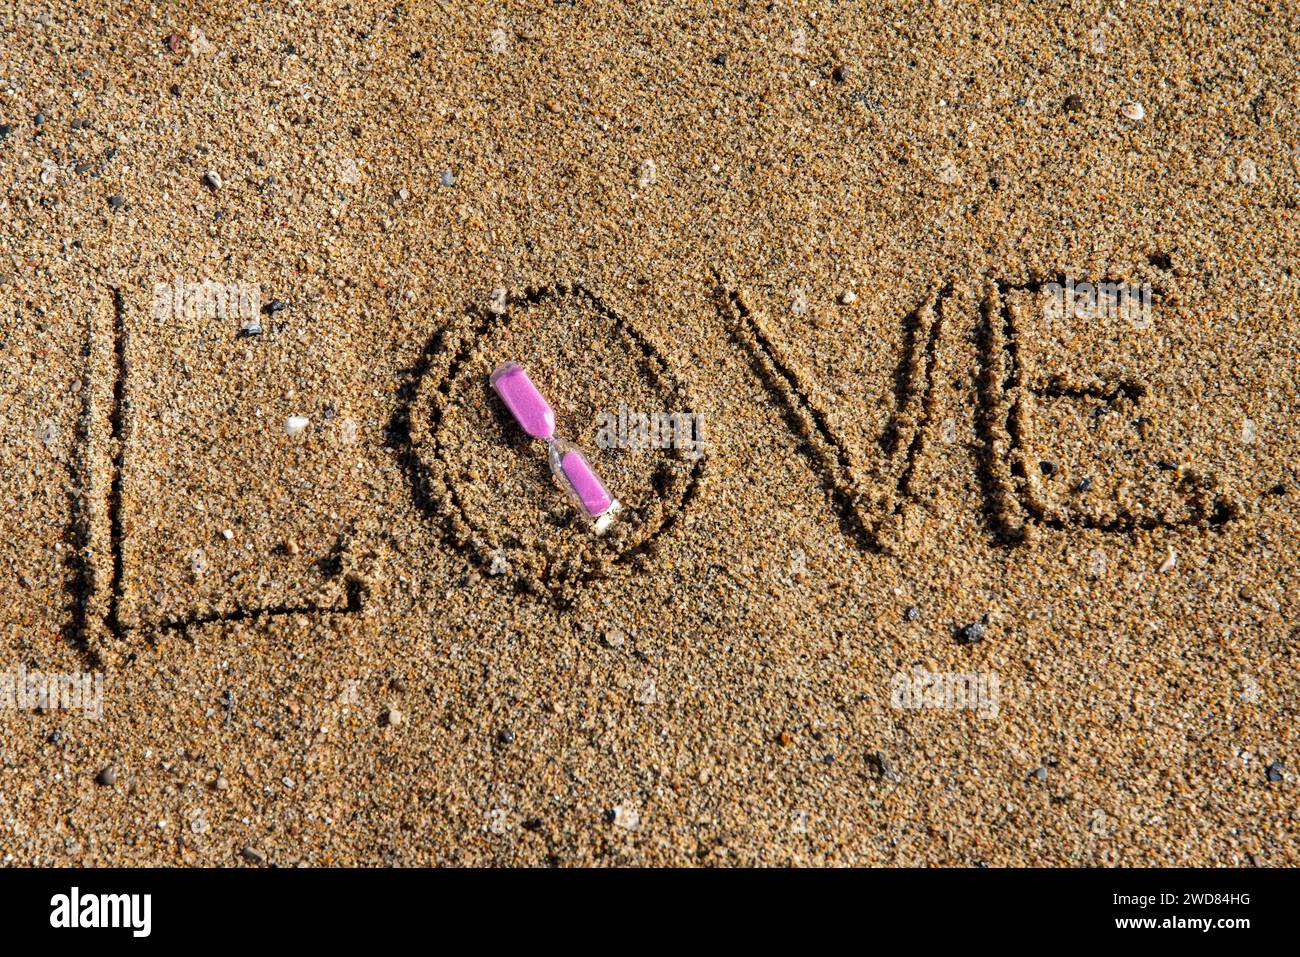 Timeless love: 'Love' inscribed on the beach, cradling a pink-hued hourglass, where romance meets the sands of eternal moments Stock Photo